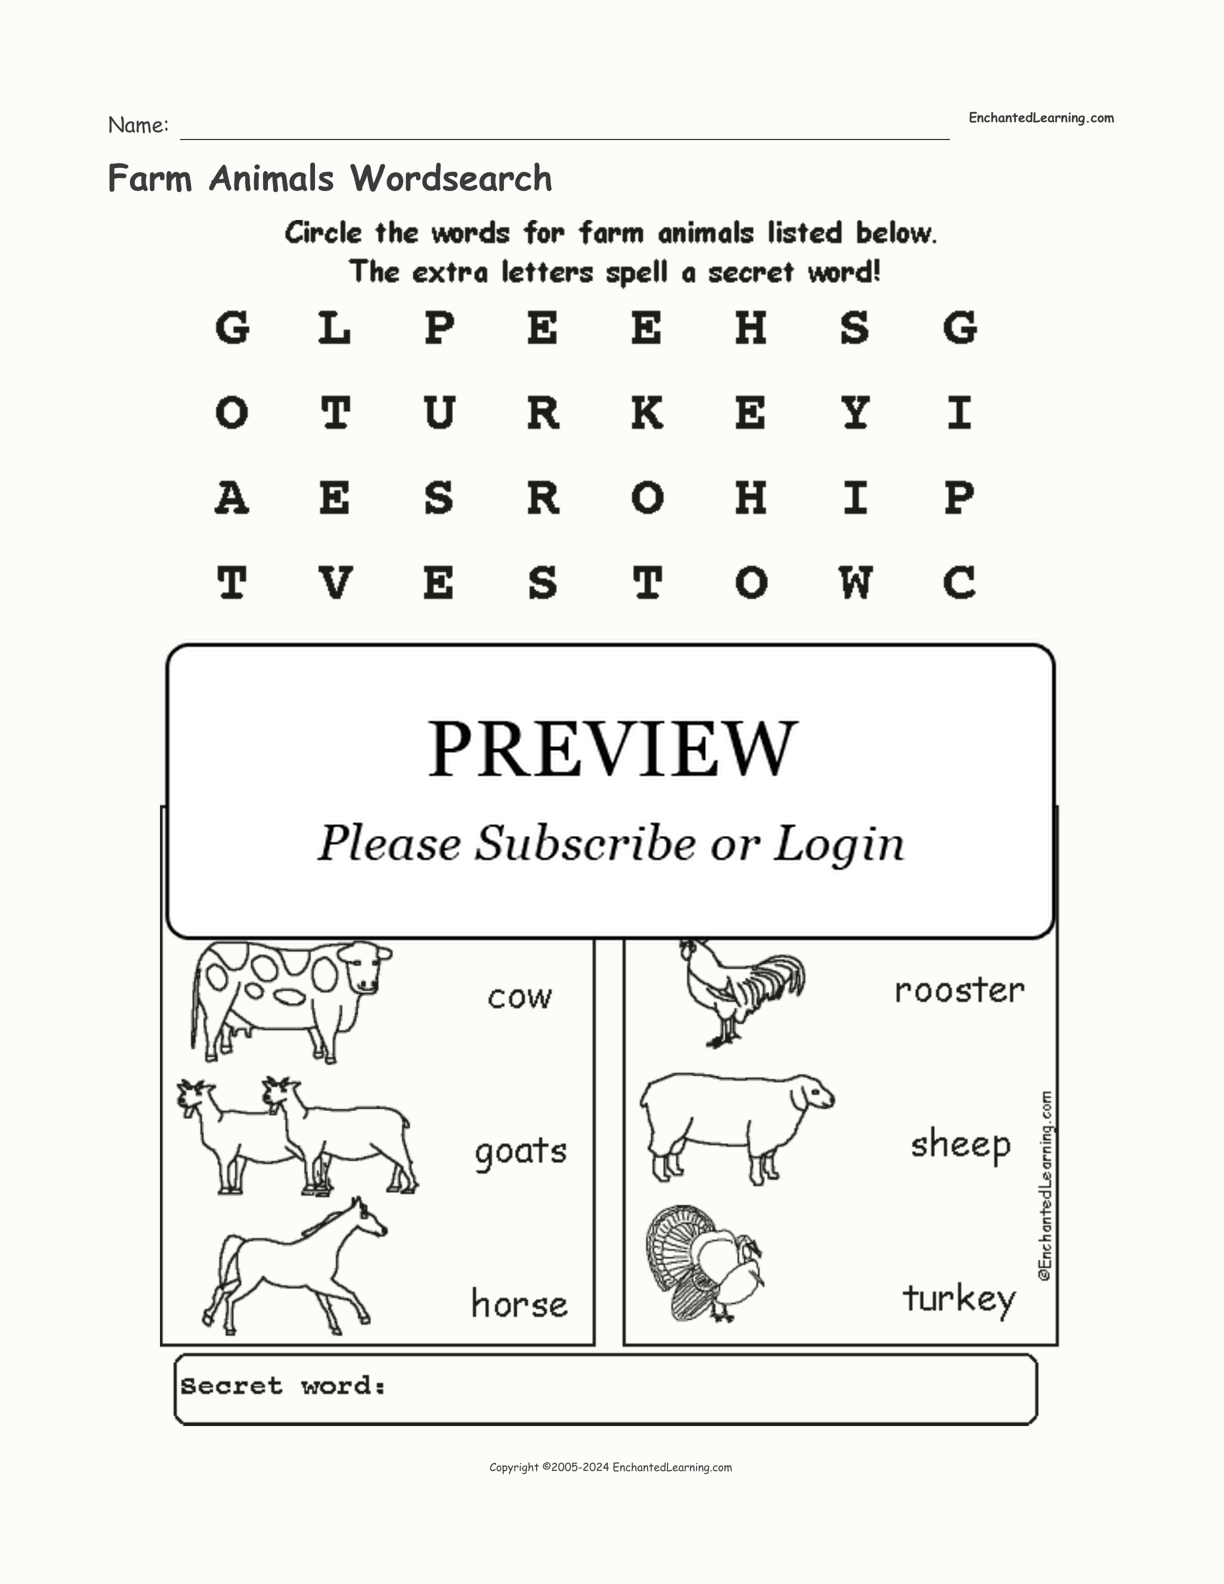 Farm Animals Wordsearch interactive worksheet page 1